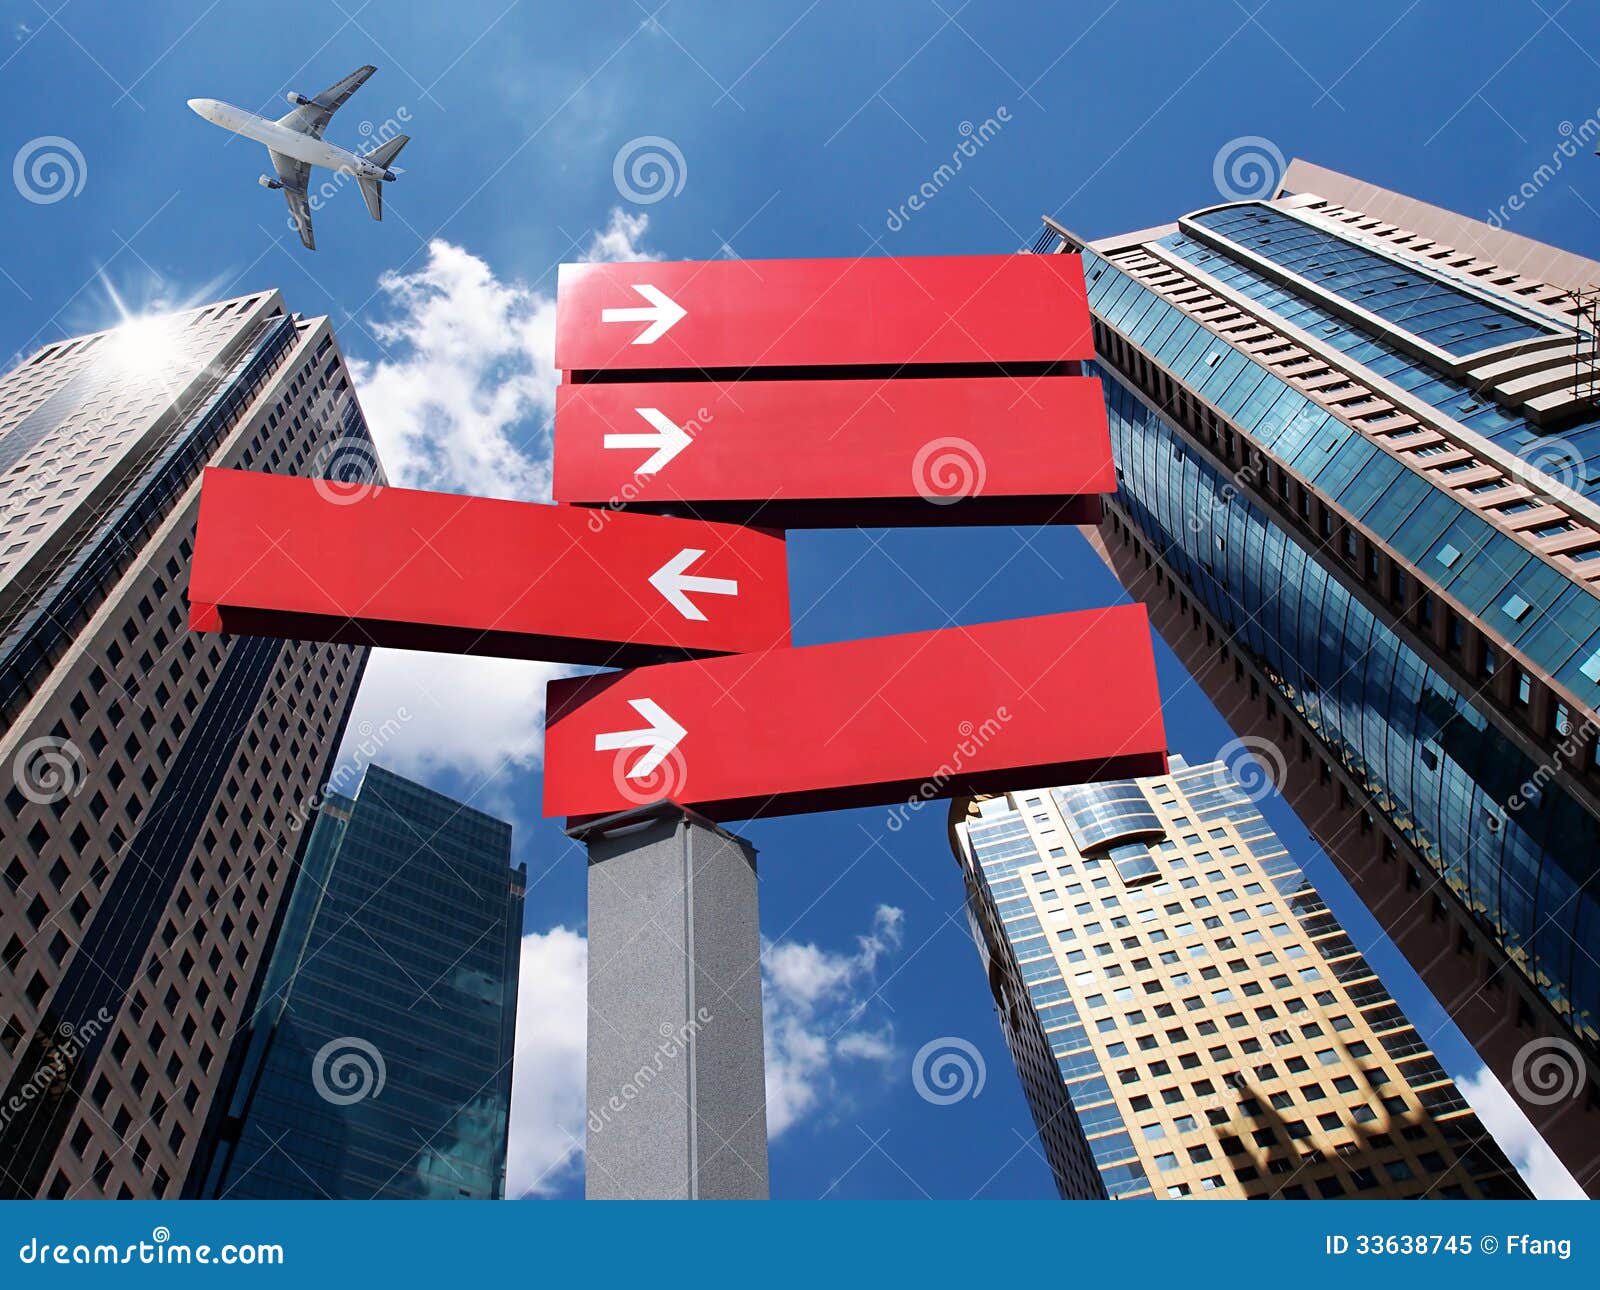 signpost and buildings